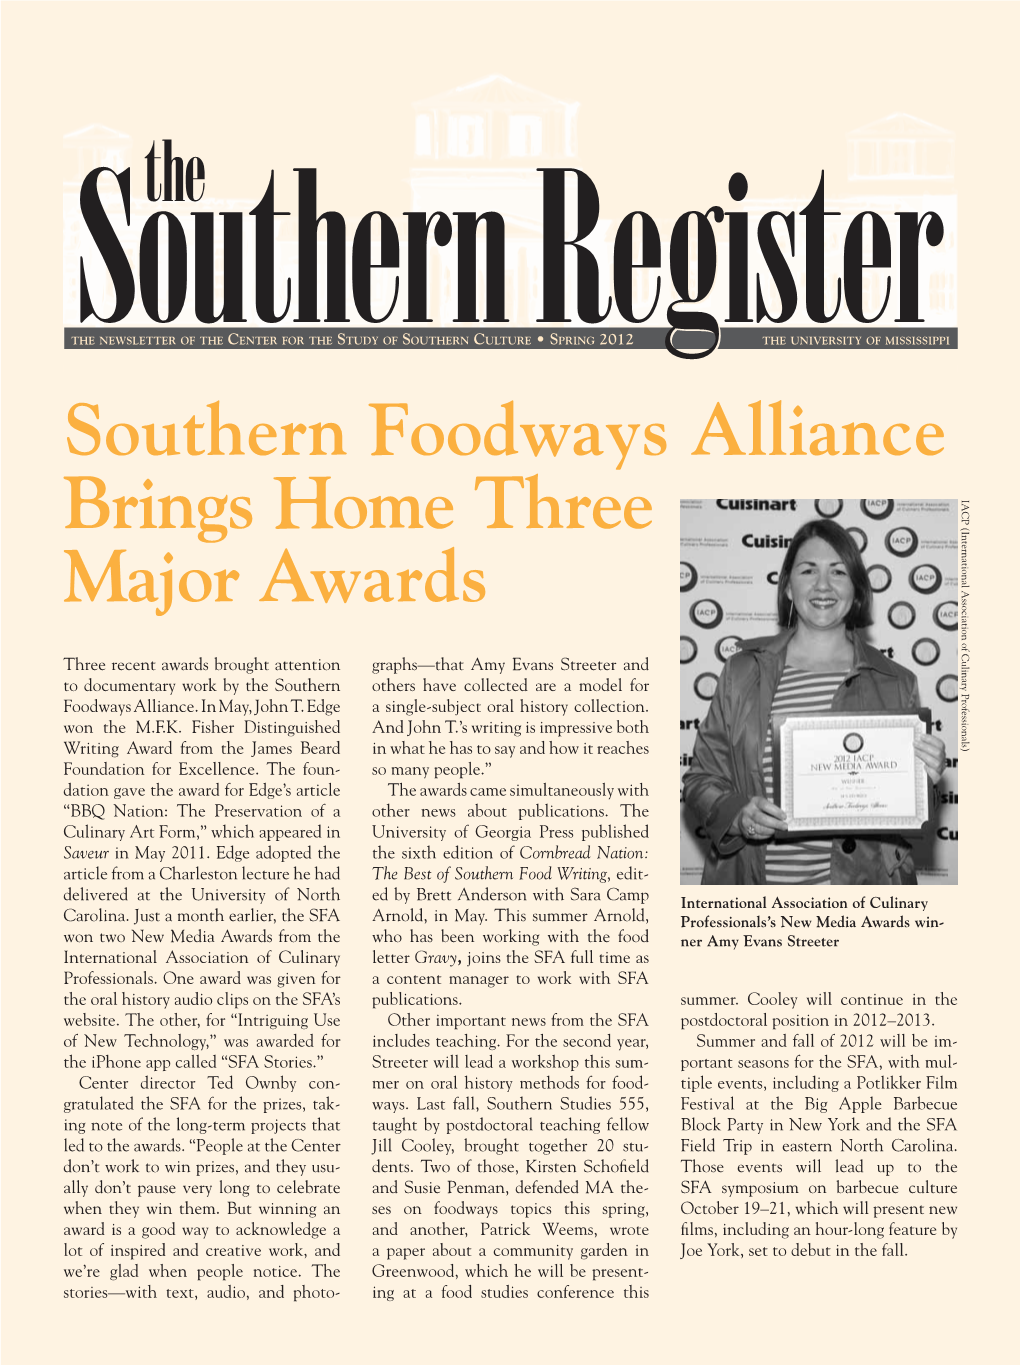 Southern Foodways Alliance Brings Home Three Major Awards